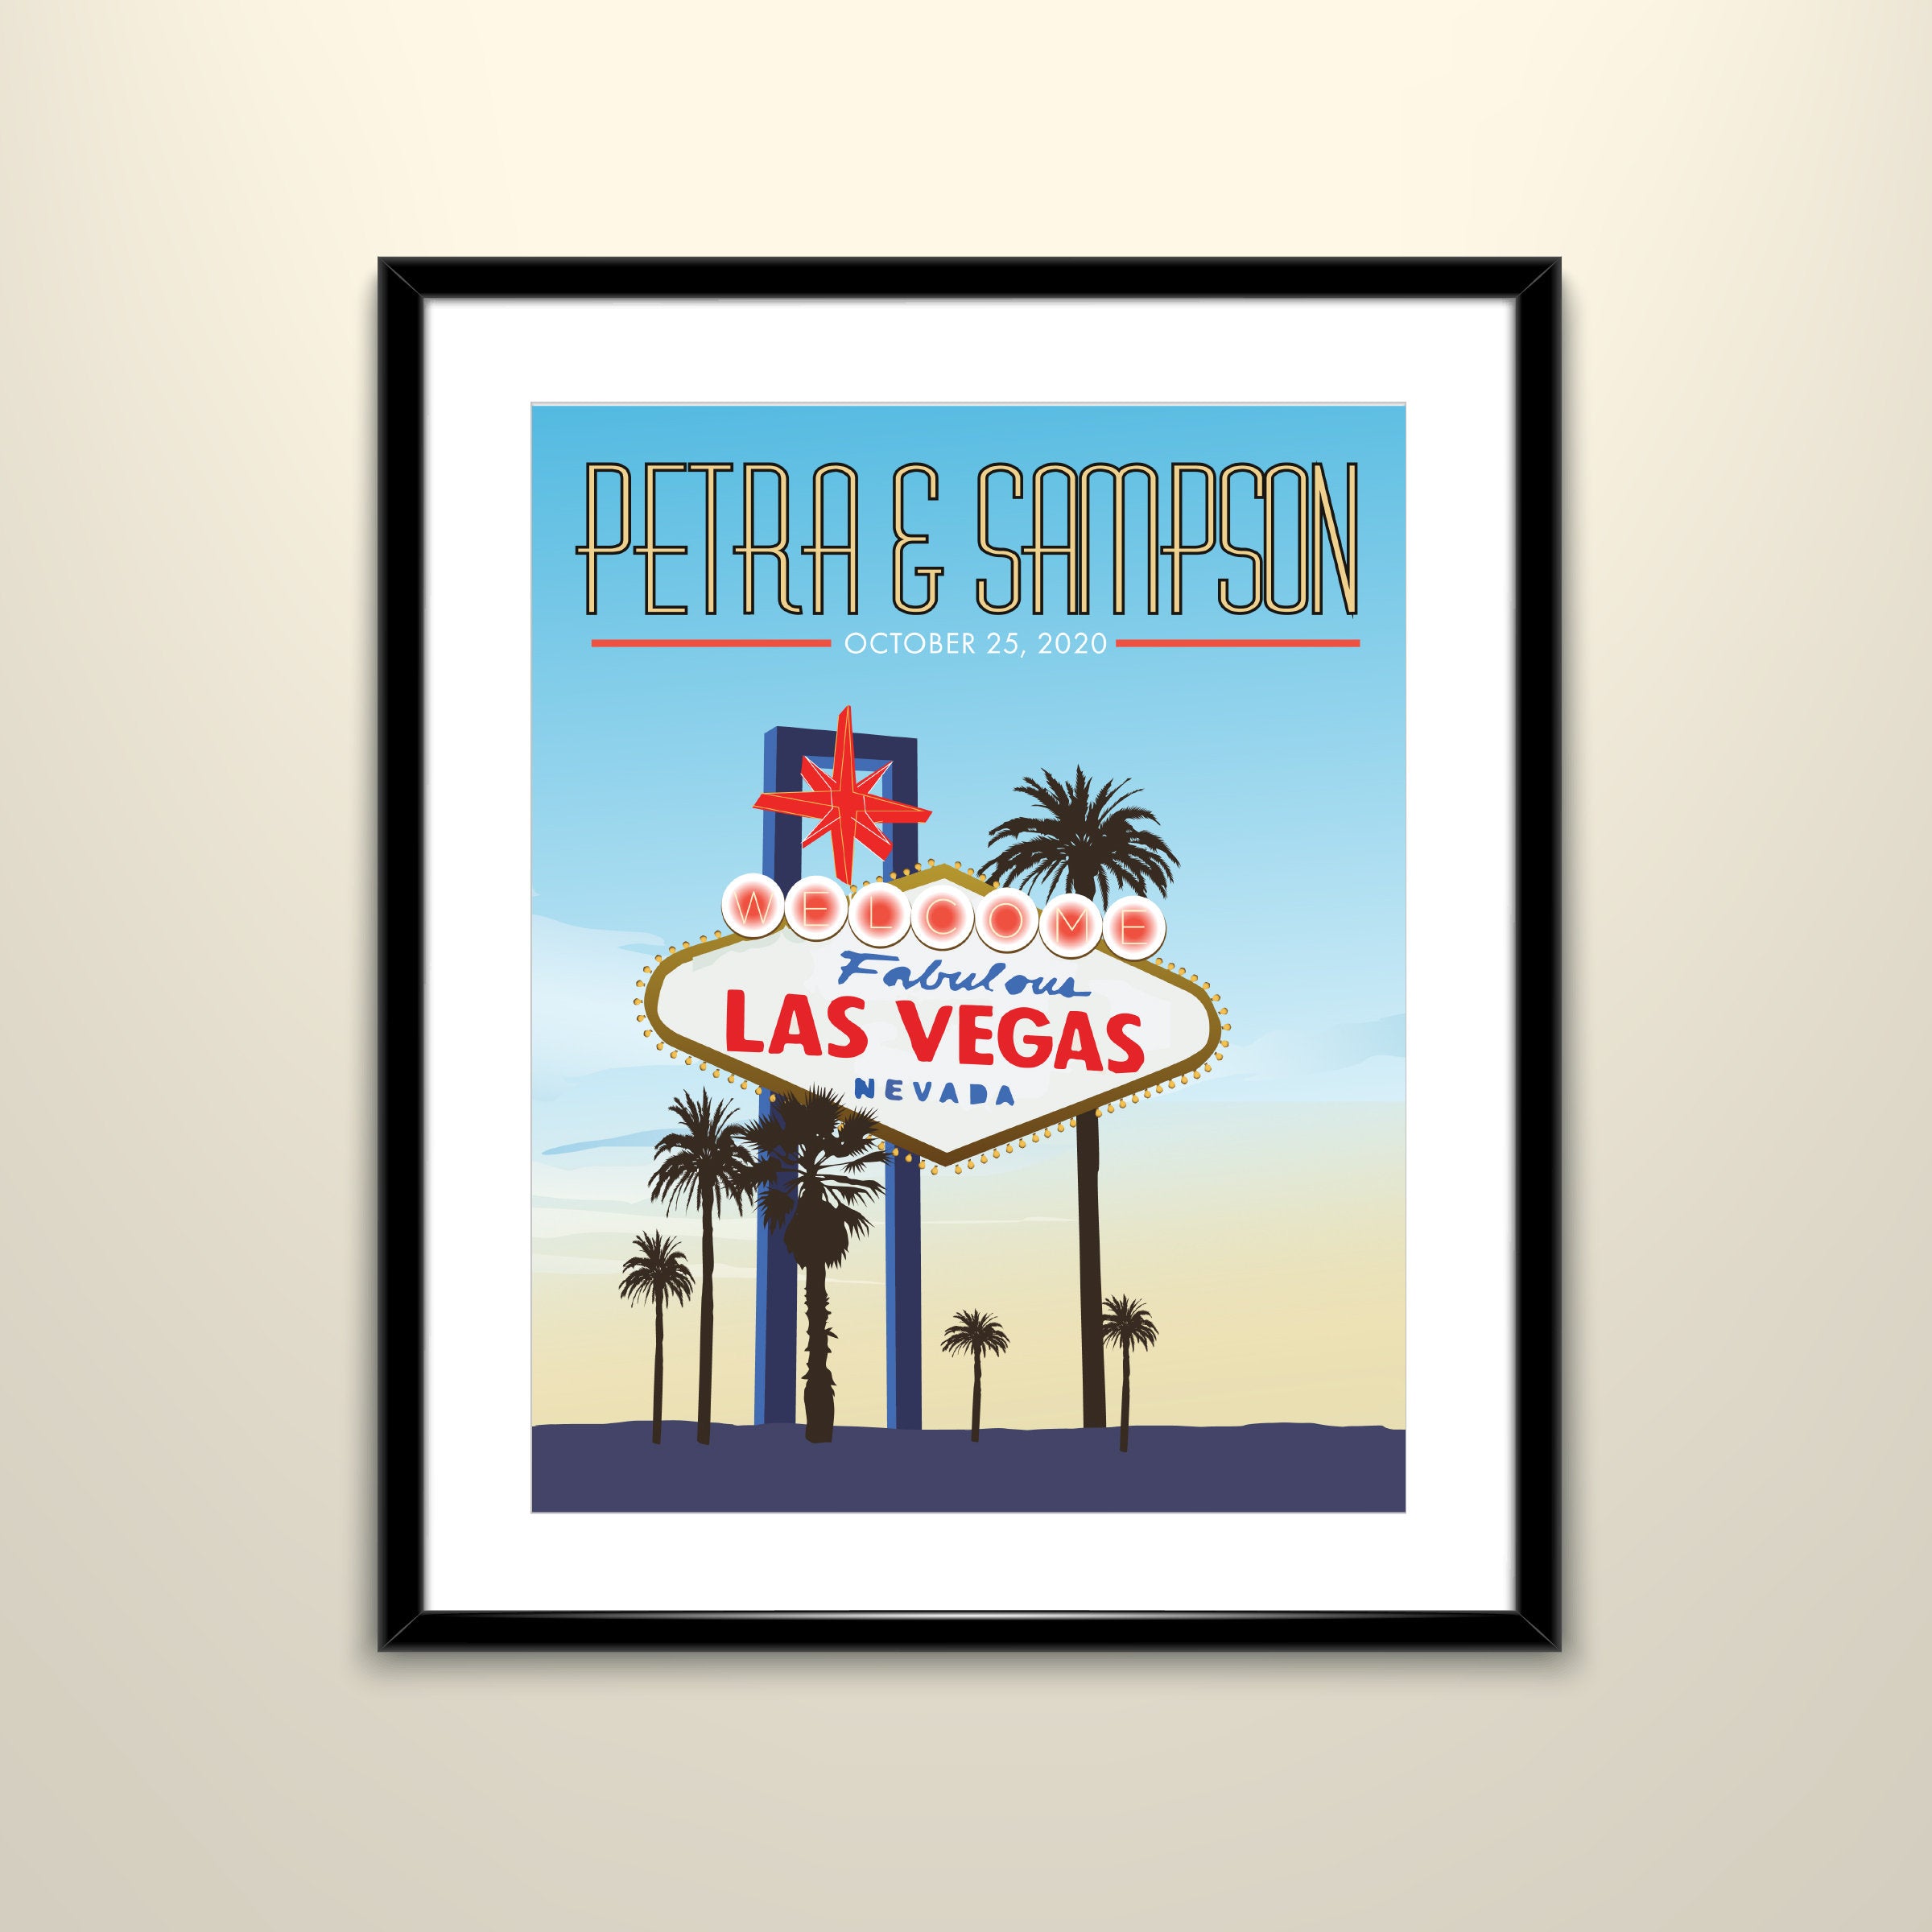 Las Vegas Famous Sign Travel 11x14 Paper Poster - Wedding Poster personalized with Names and date (frame not included)